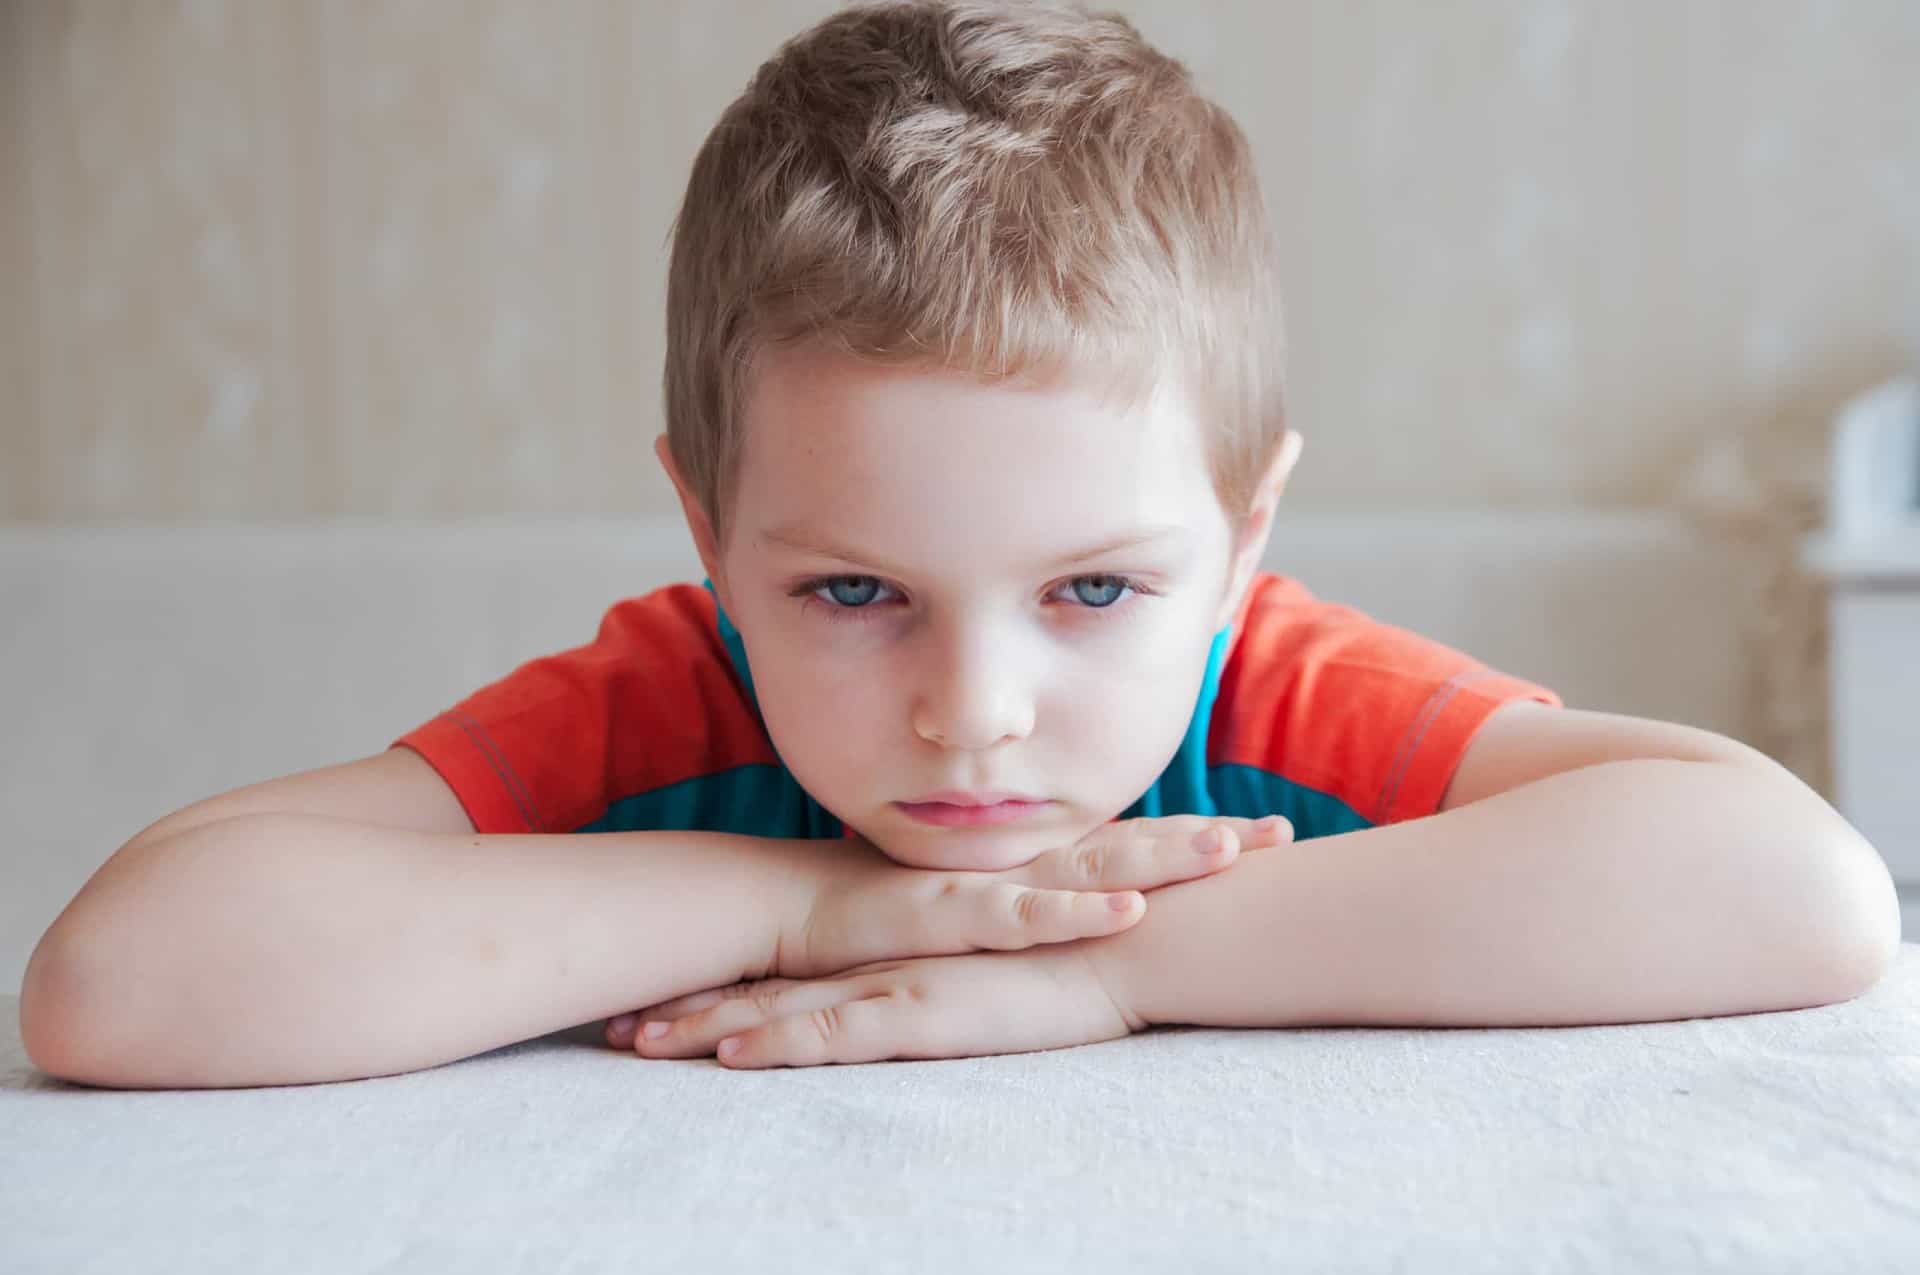 <p><span>Selective mutism normally develops during childhood, and in certain cases it can continue into adulthood. </span></p><p>You may also like:<a href="https://www.starsinsider.com/n/179302?utm_source=msn.com&utm_medium=display&utm_campaign=referral_description&utm_content=521574en-us"> American actors who've served their country</a></p>